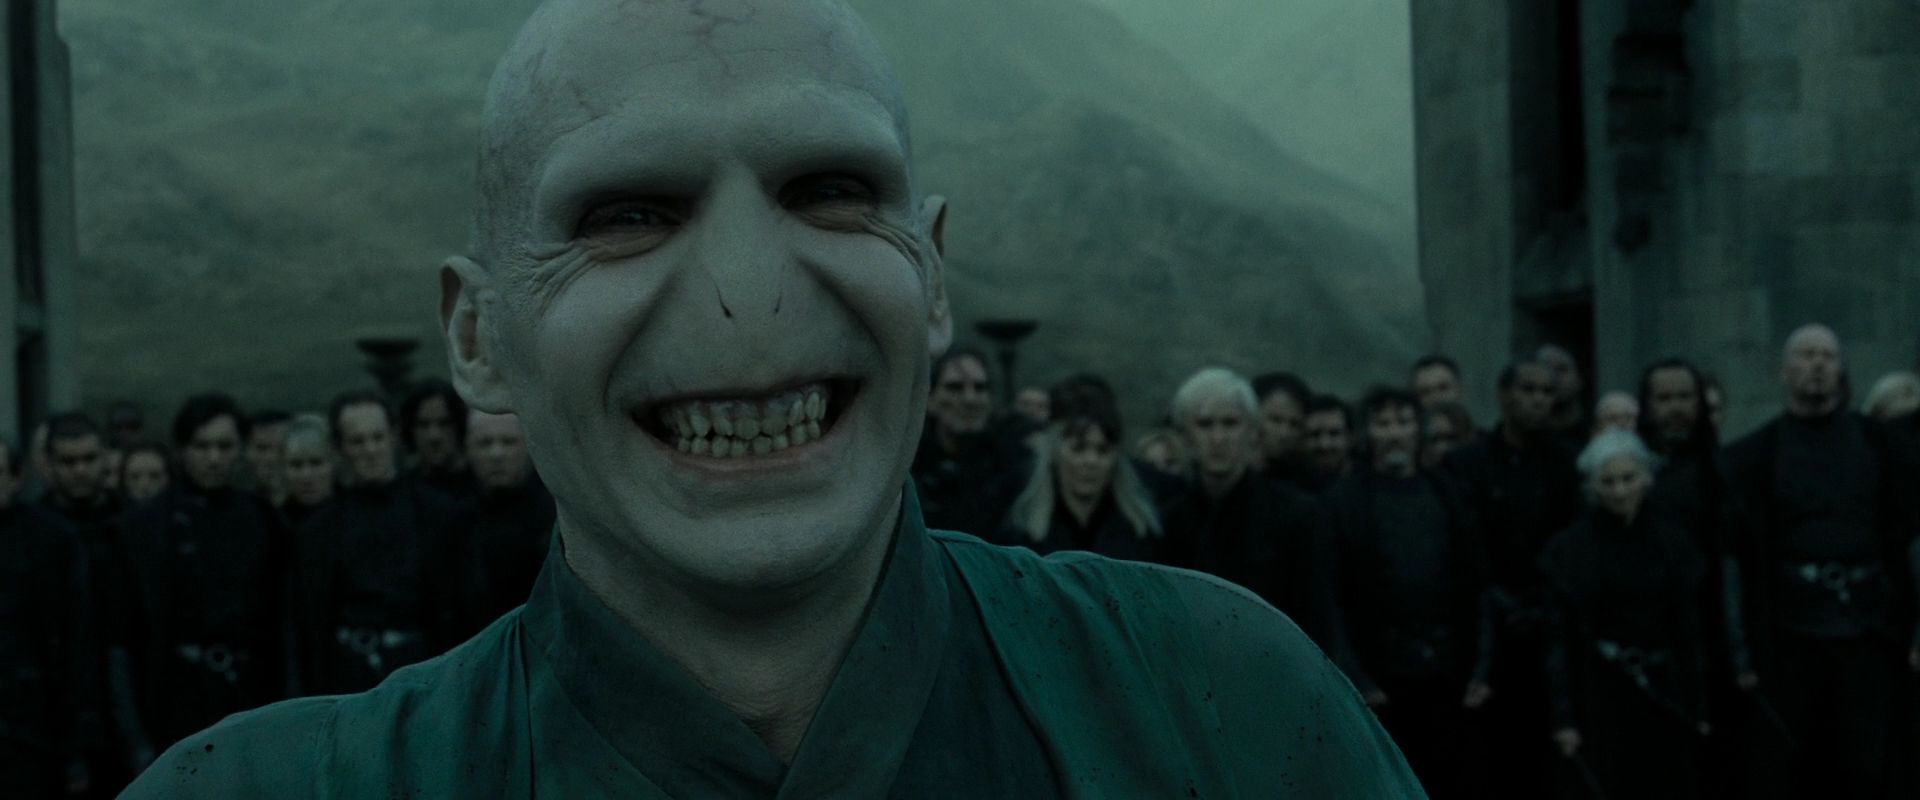 Topic à flood - Page 37 HP-DH-part-2-lord-voldemort-26625098-1920-800